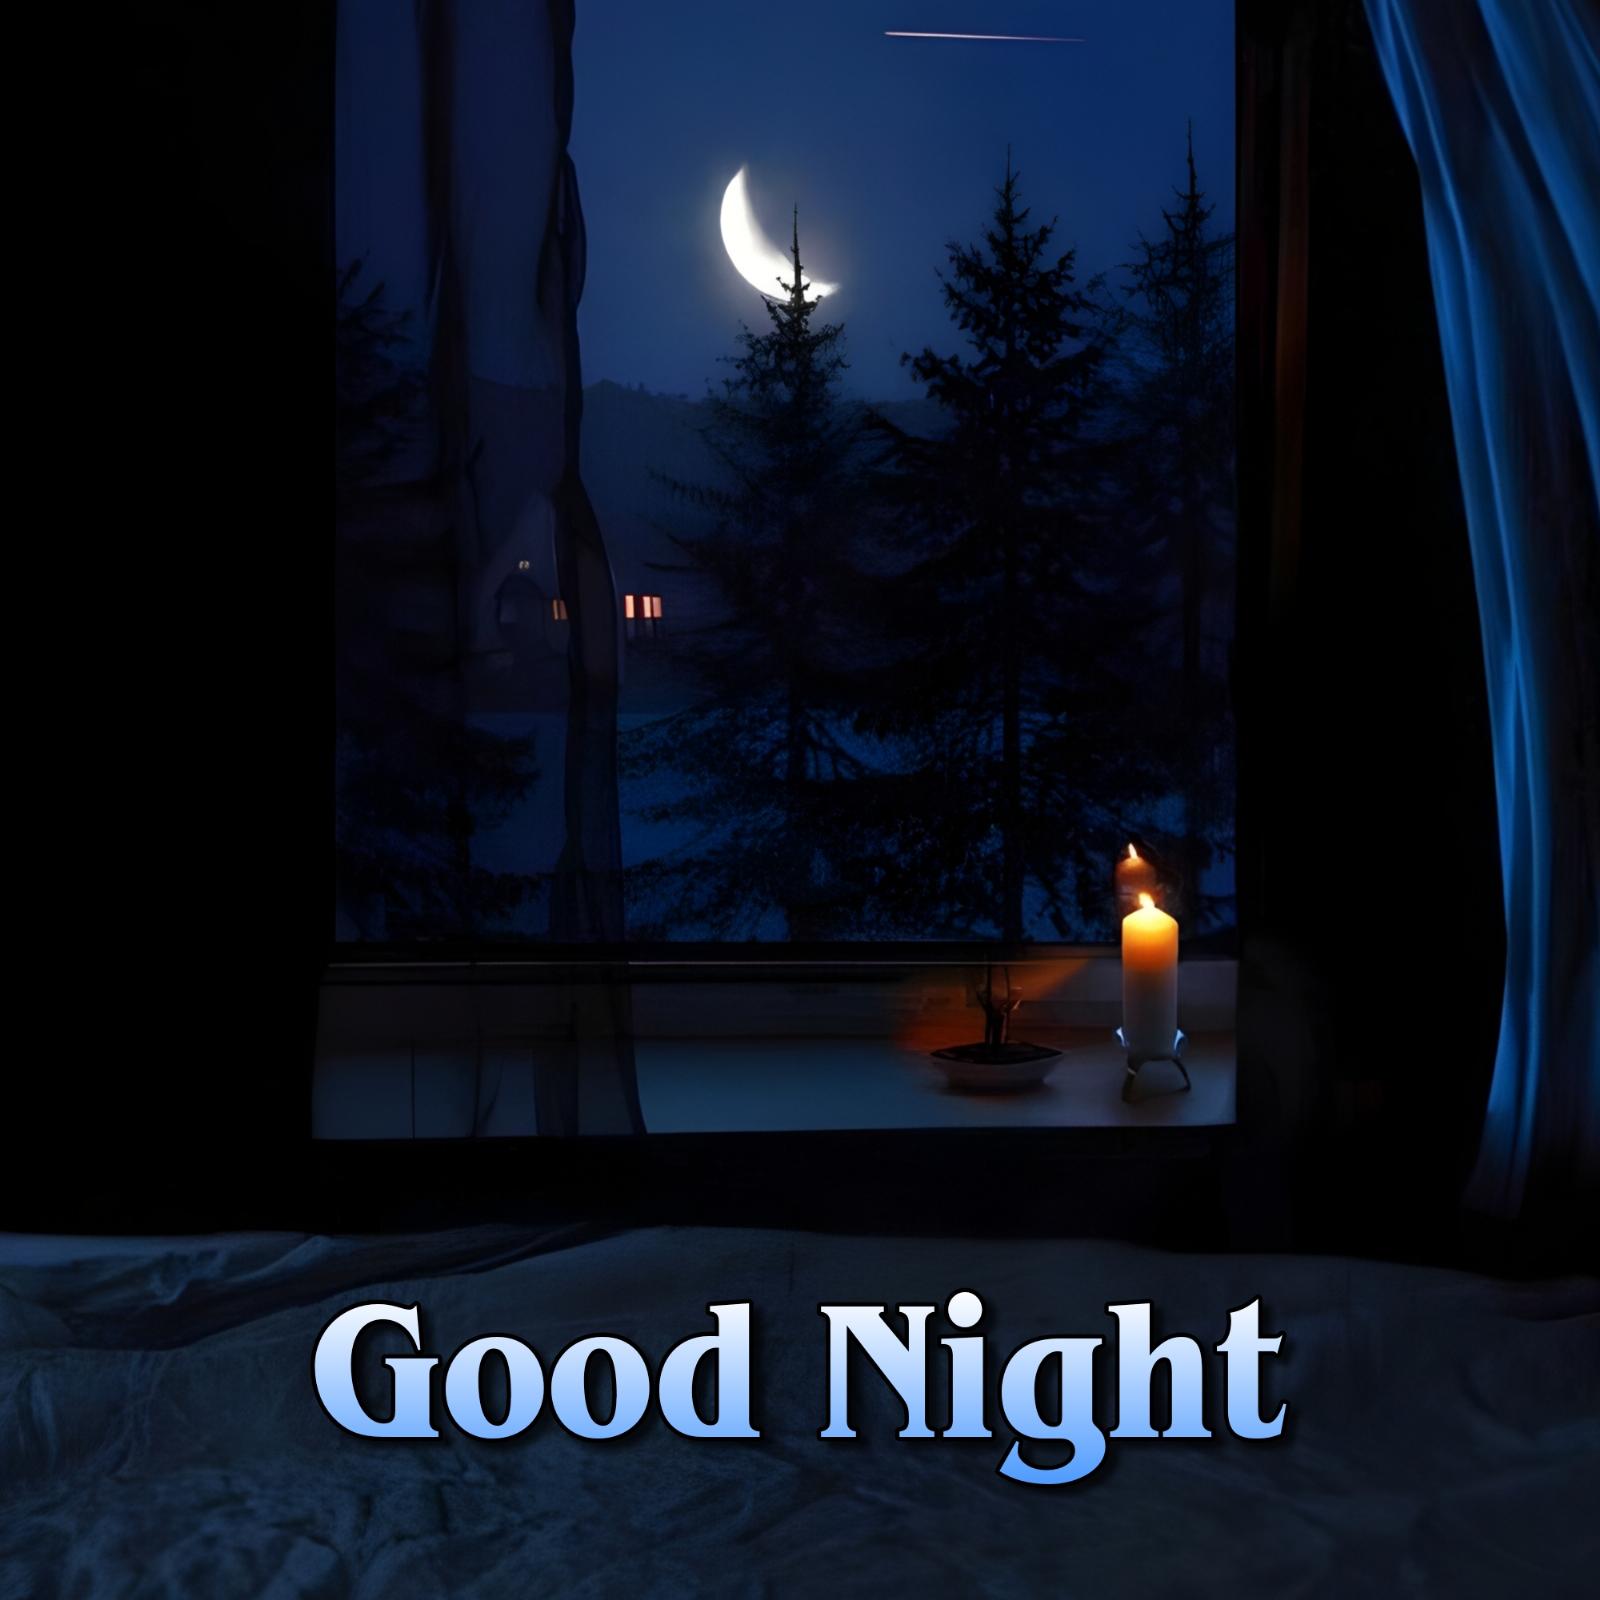 Good Night Moon Candle Images